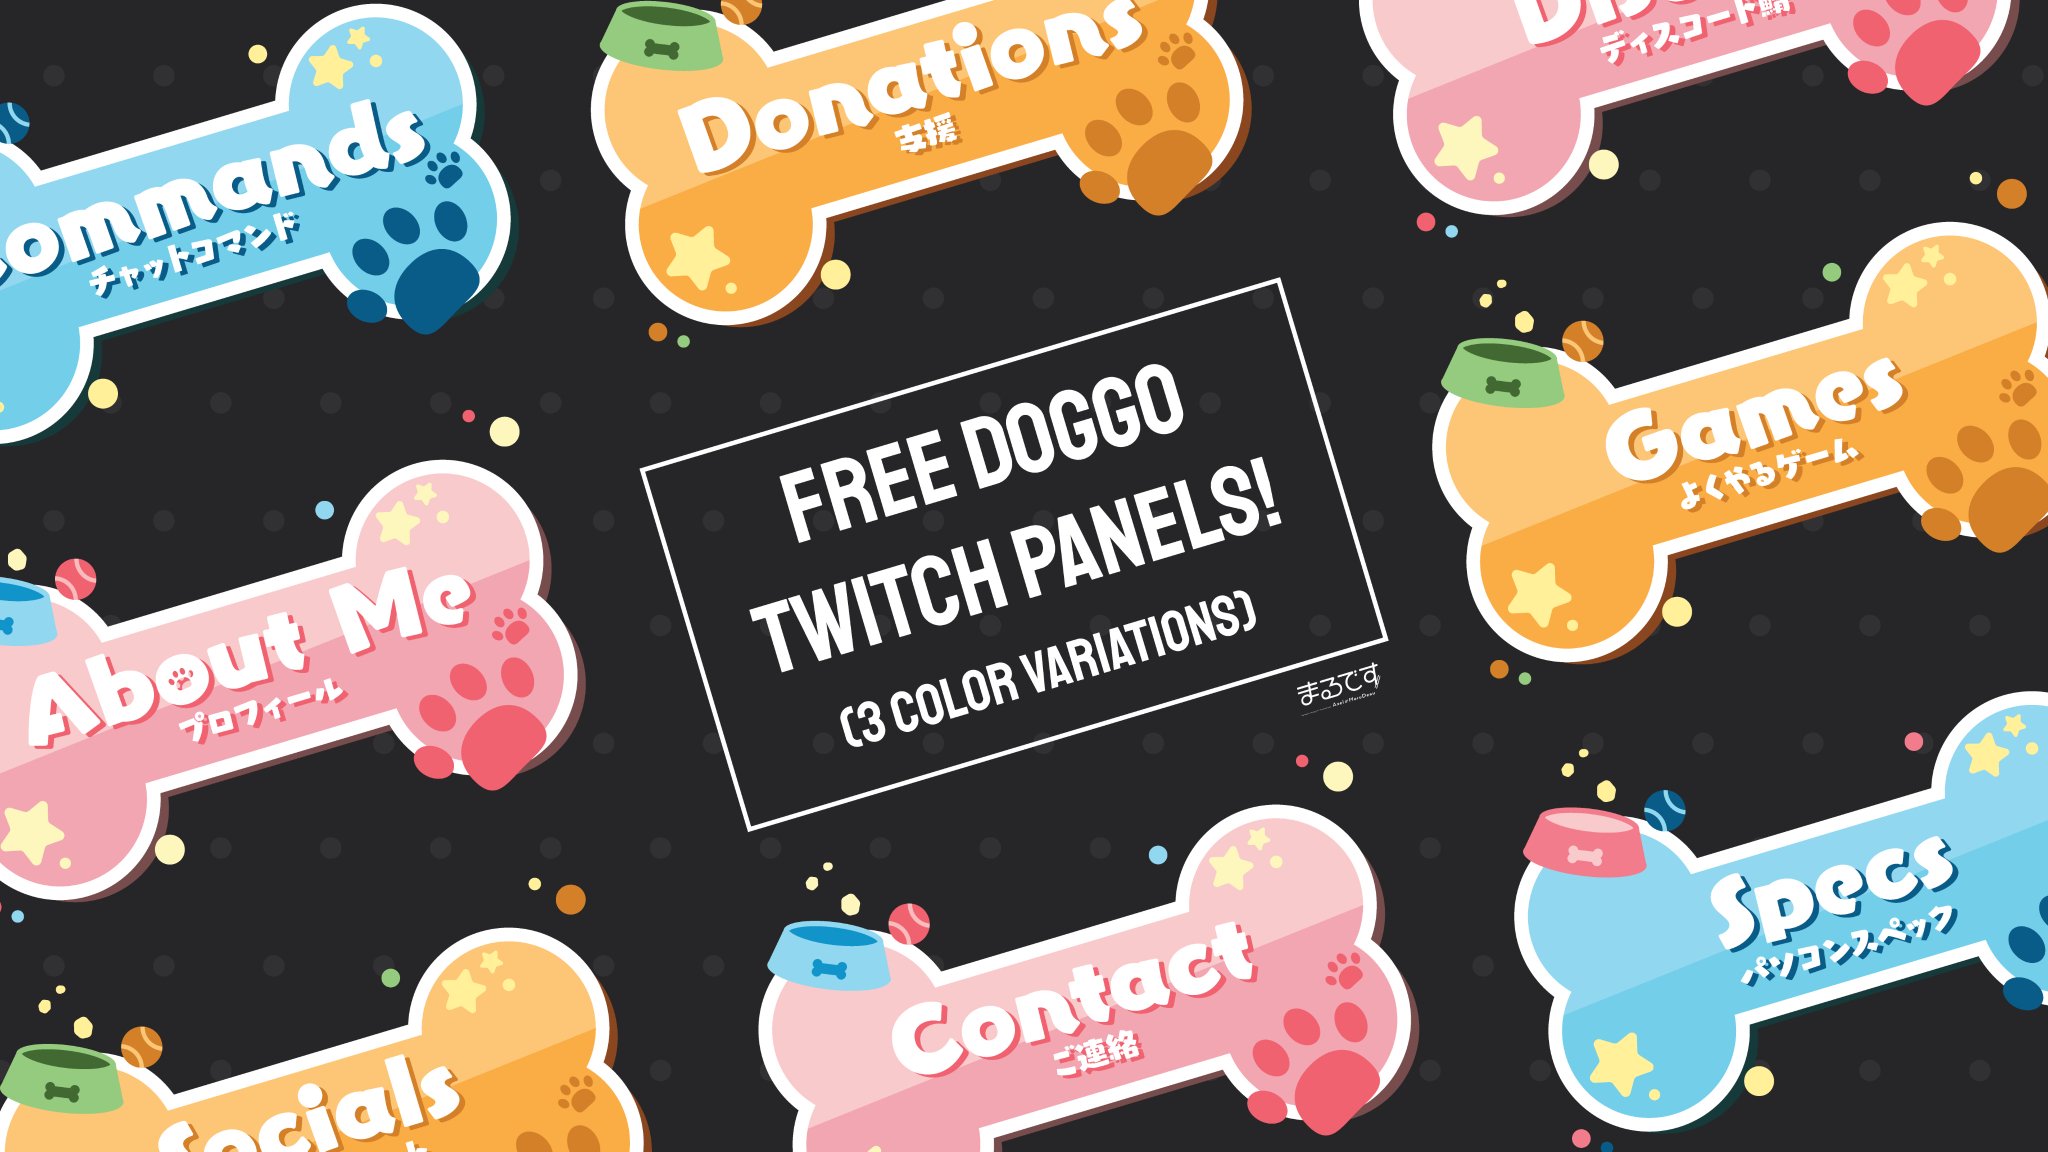 Axel Free Dog Themed Twitch Panels With 3 Color Variations Rts Appreciated Download Link In Replies Twitchパネルを無料配布しています ダウンロードはリプからお願いします Axelfreebies Vtuberassets フリー素材 T Co